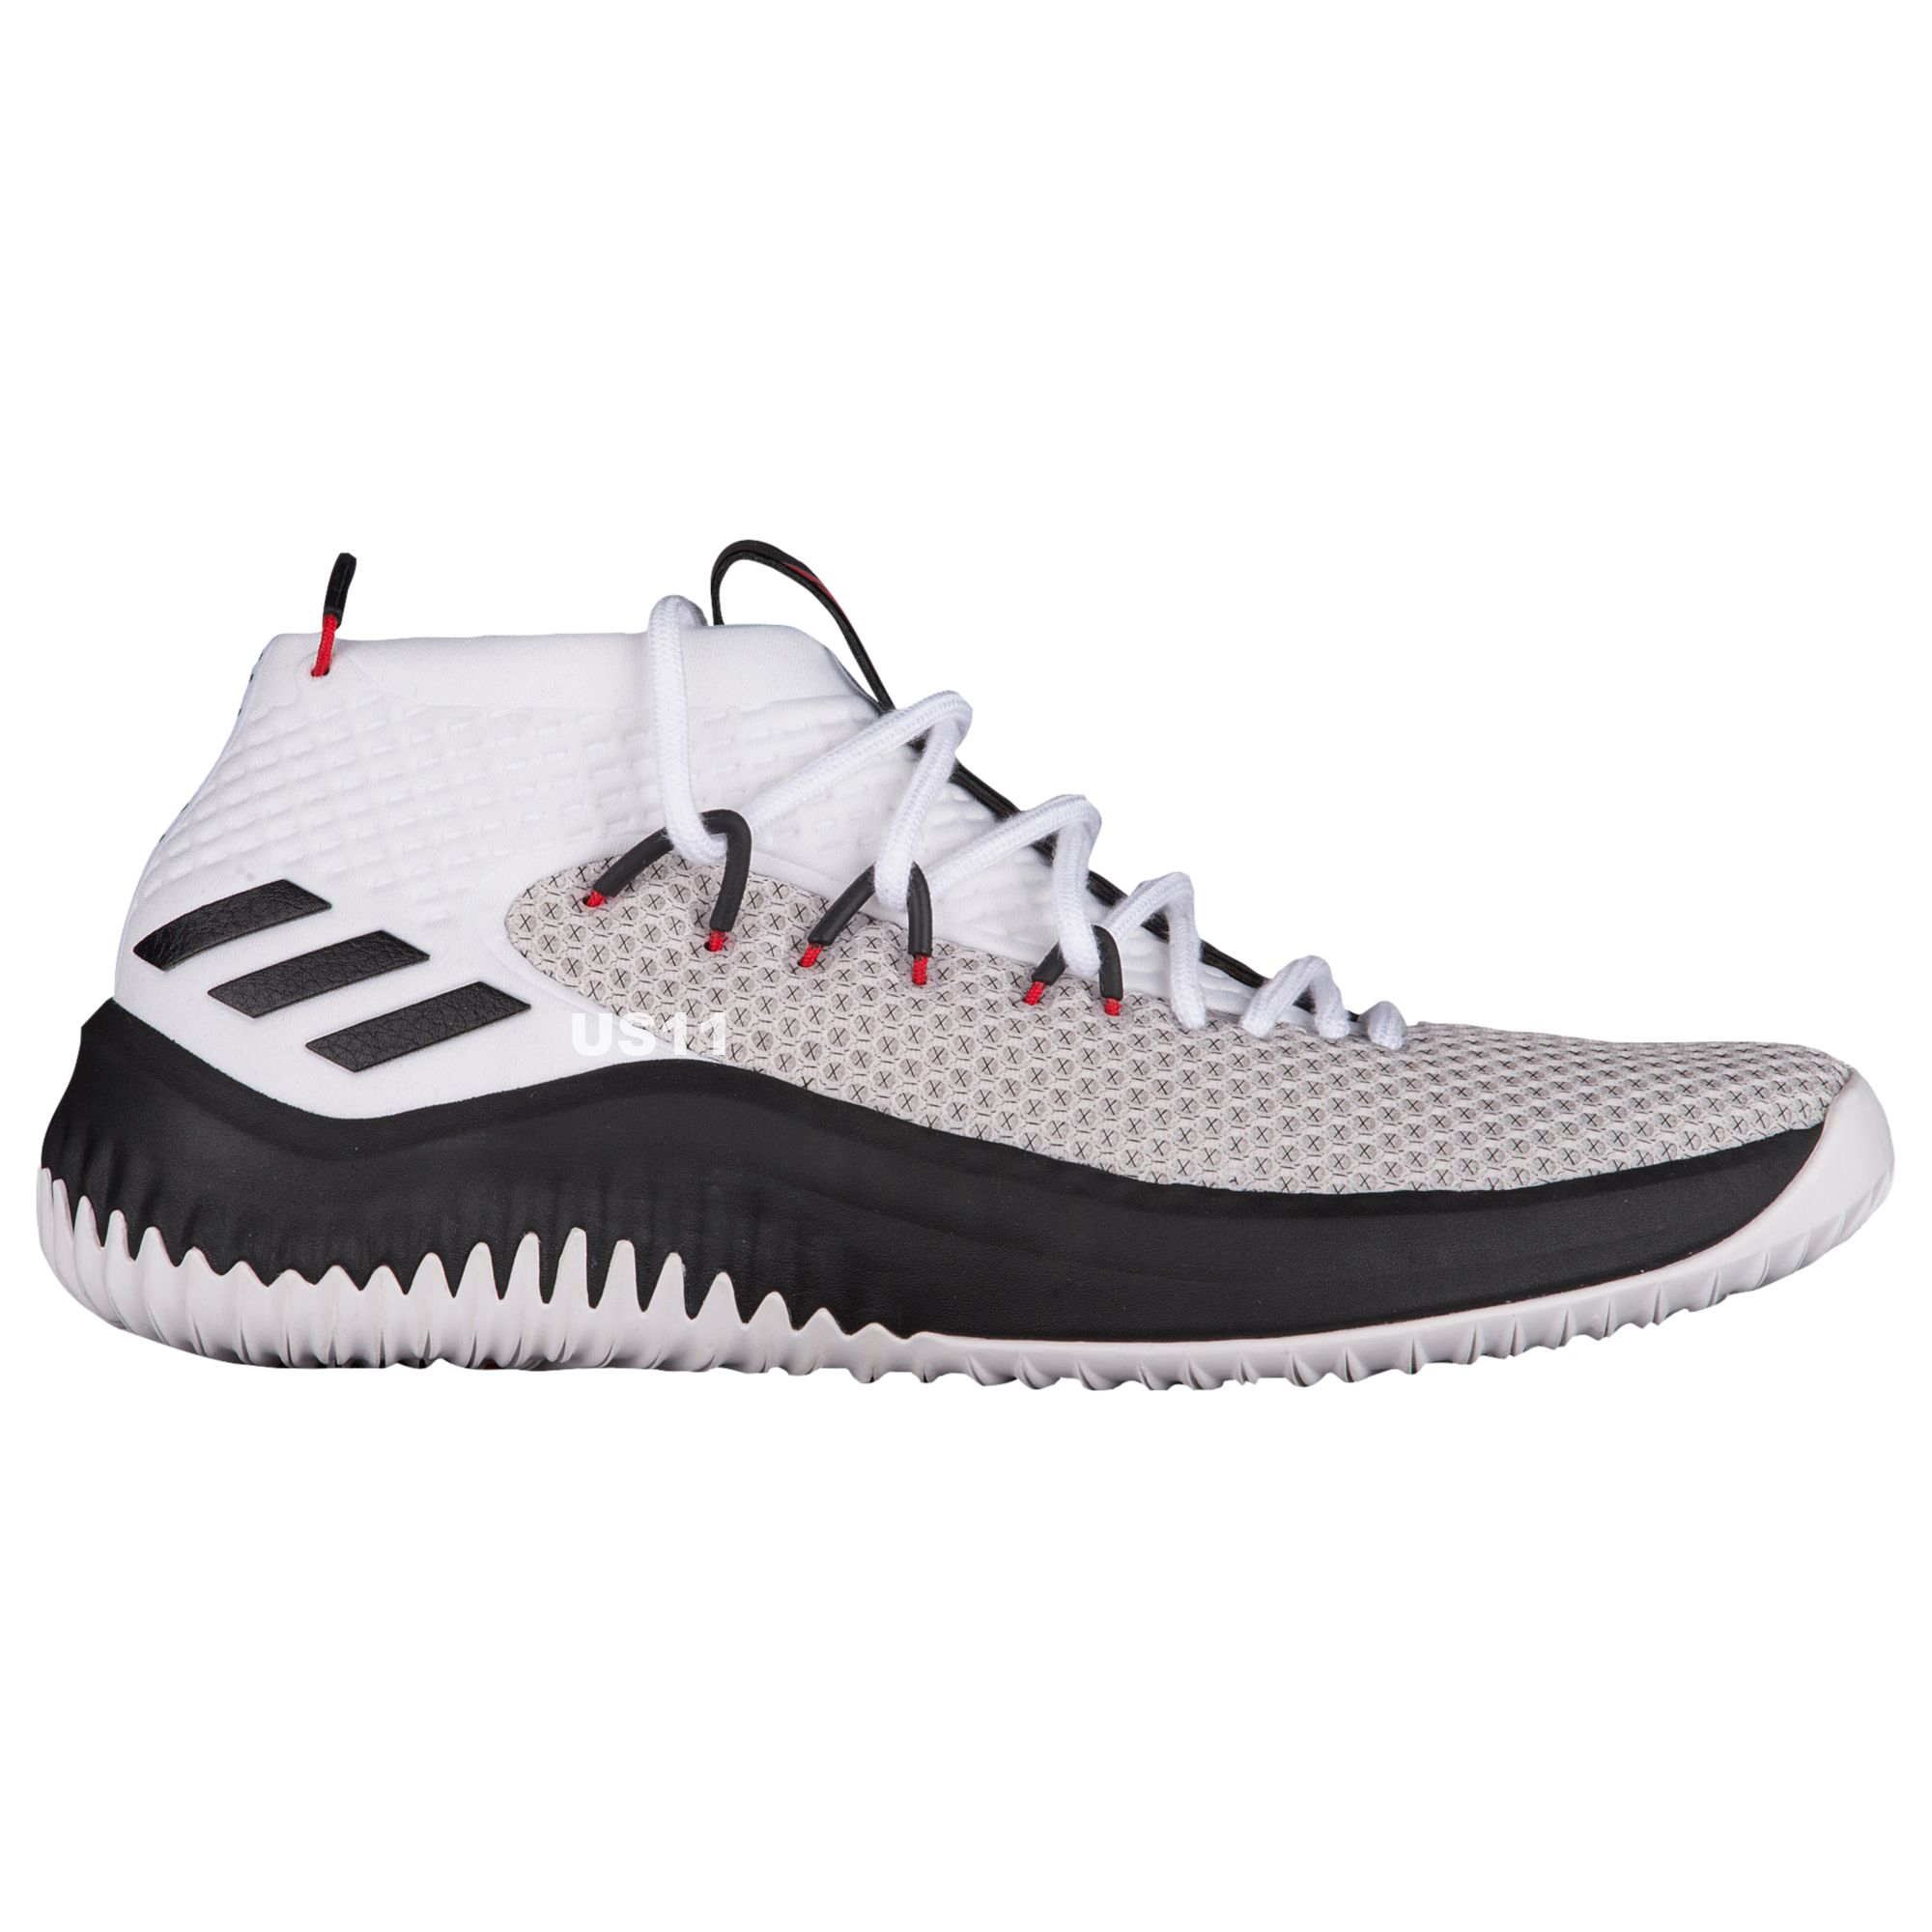 adidas Dame 8 Dame Time White Red Black Basketball Shoes Sneakers GY0384  Men's 9 | eBay